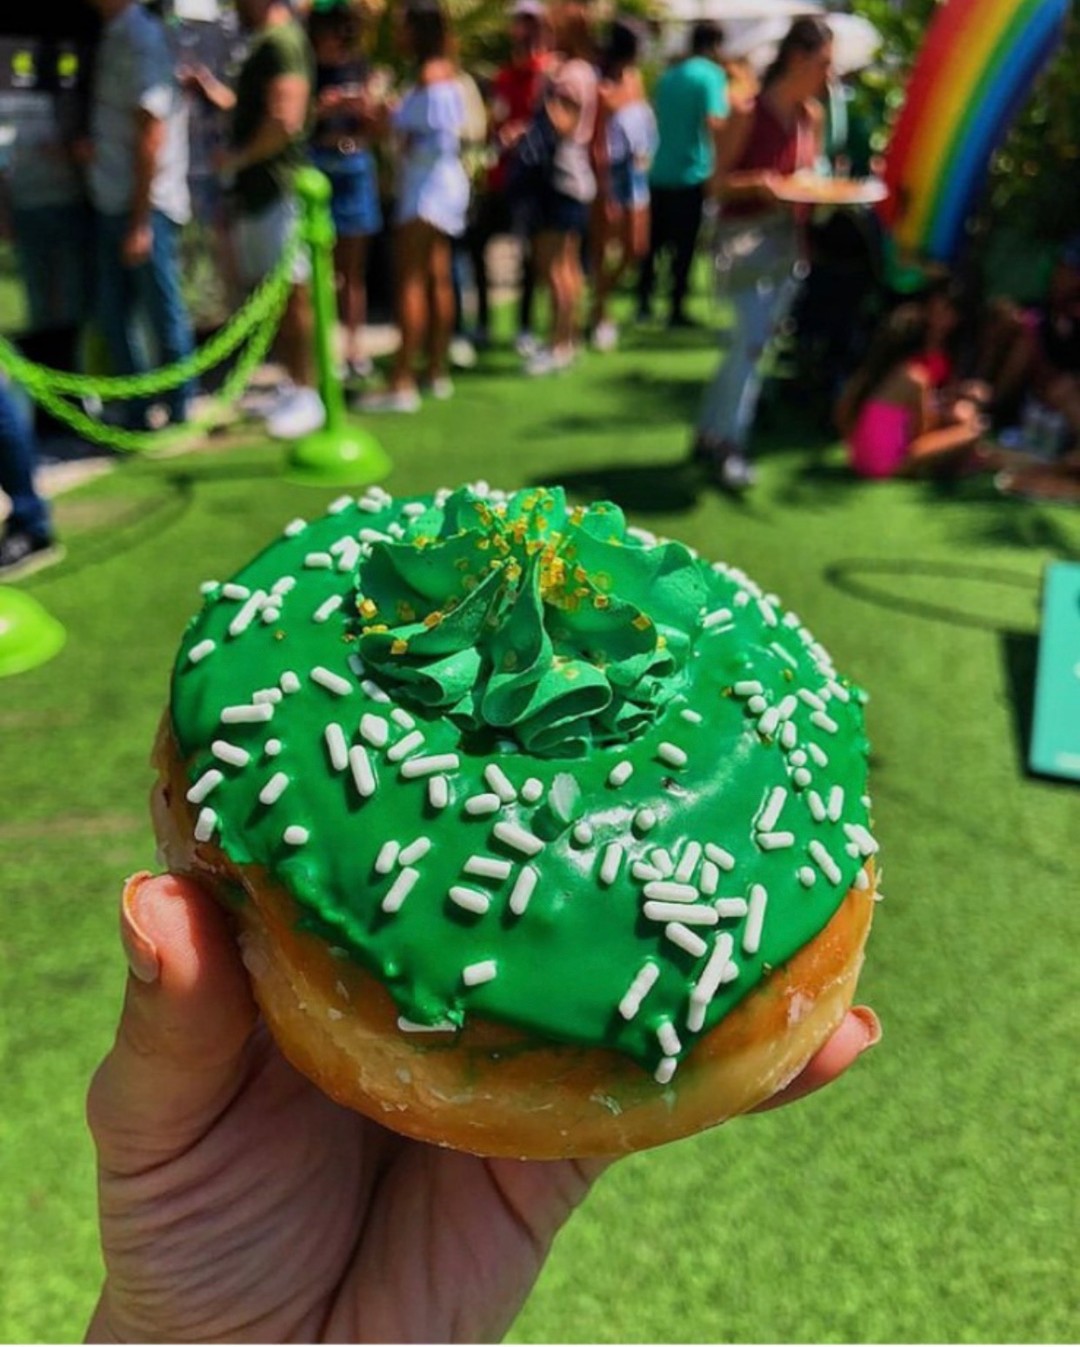 glazed donut with green icing and sprinkles, festival in the background